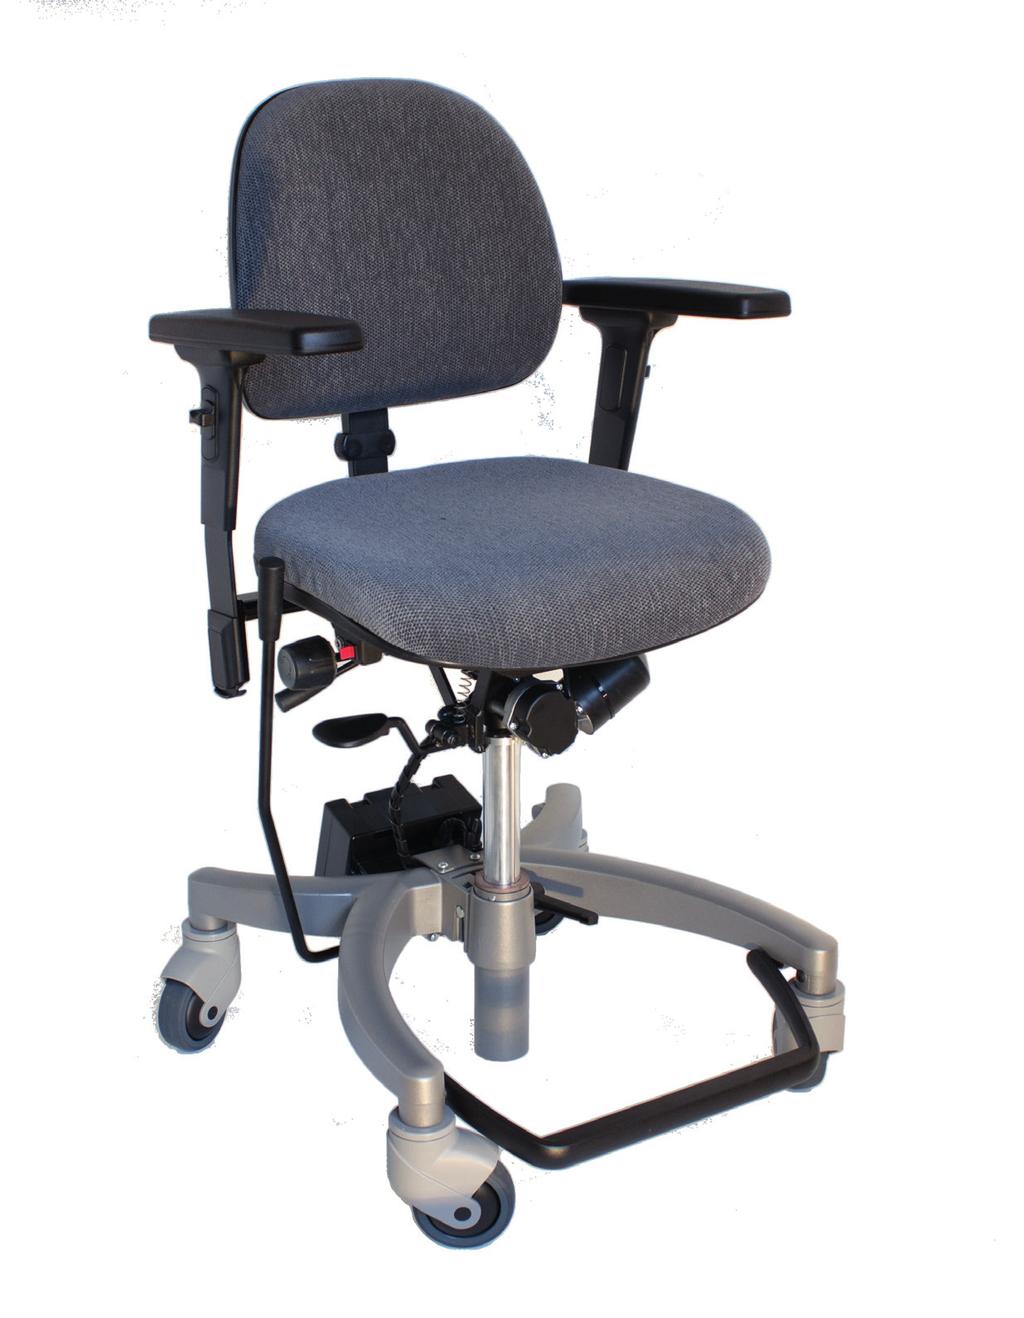 HEPRO E1 STANDARD & HEPRO E2 STANDARD Work chairs with electric seat lift 6 Hepro E2 Standard The angle between the seat and the backrest can easily be adjusted and blocked.